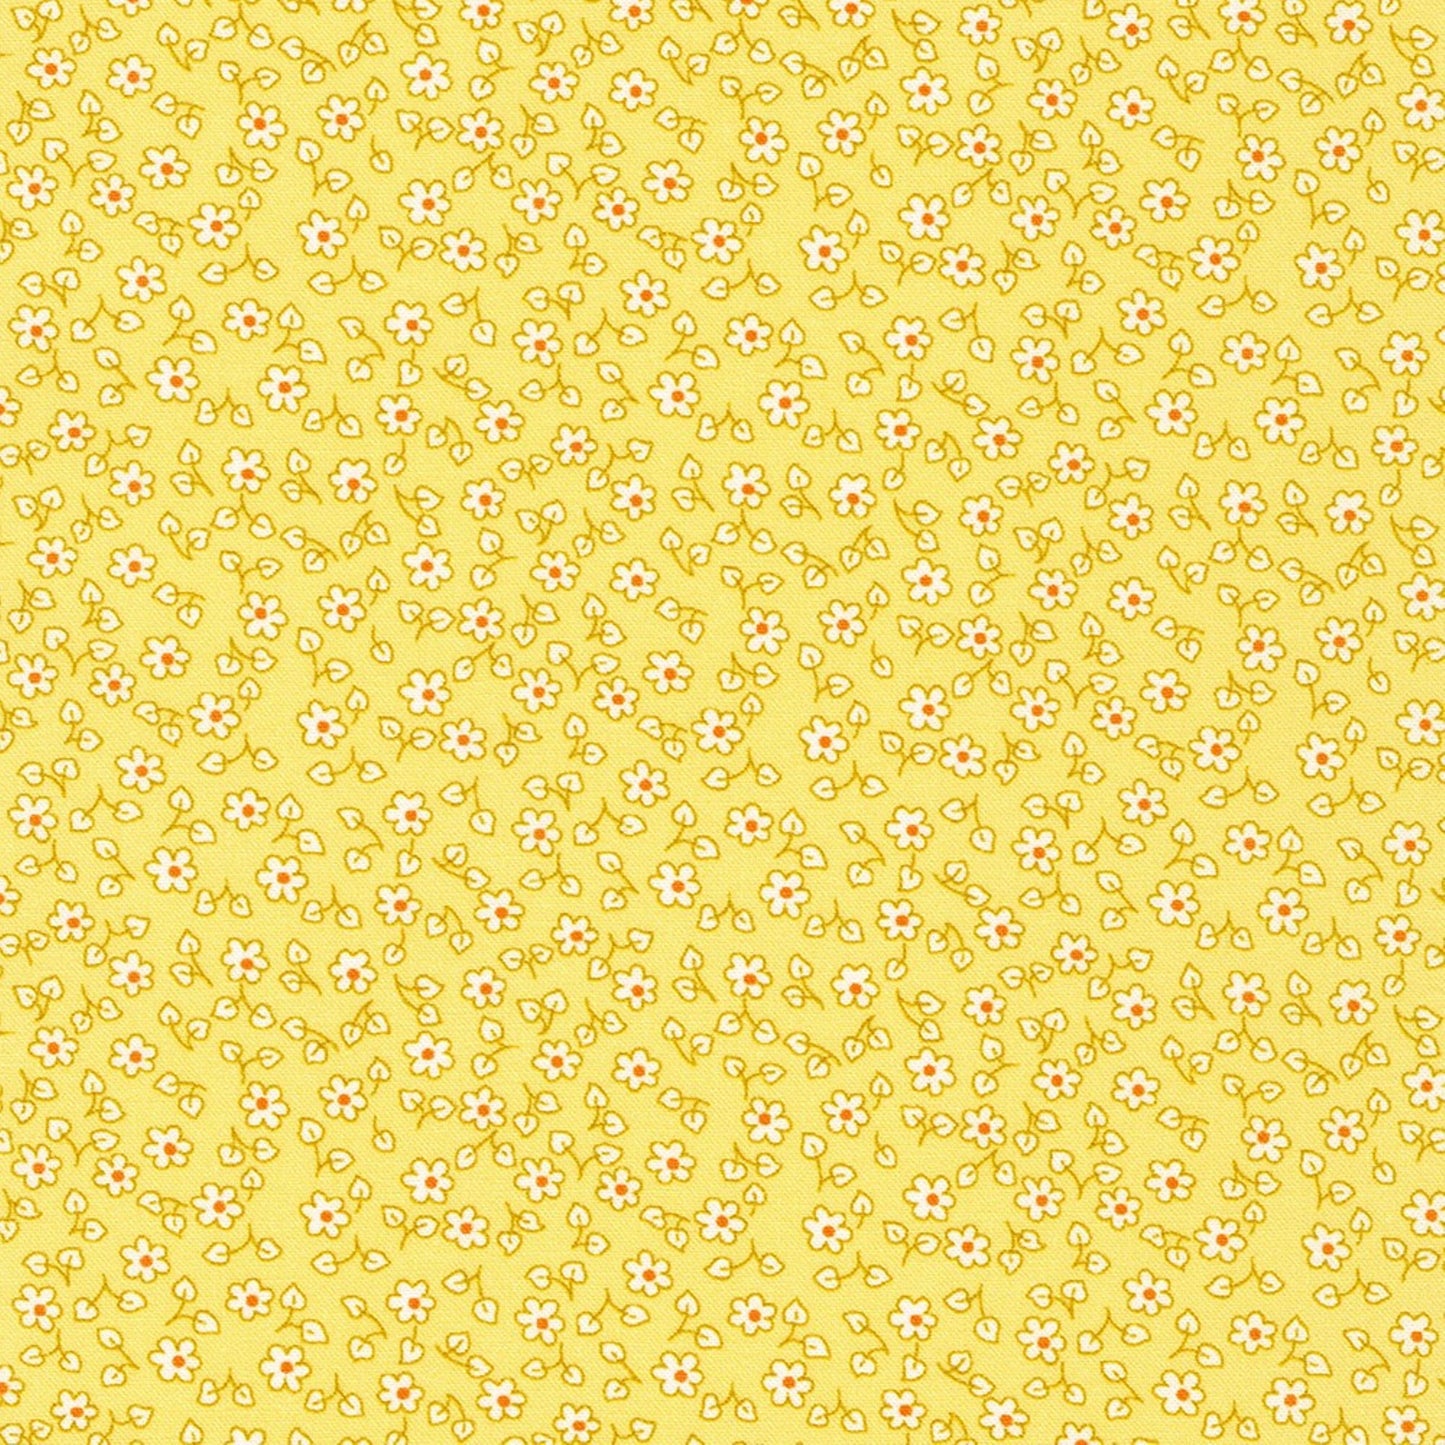 Little Blossoms mini flowers yellow 1930's style floral Kaufman cotton quilt fabric